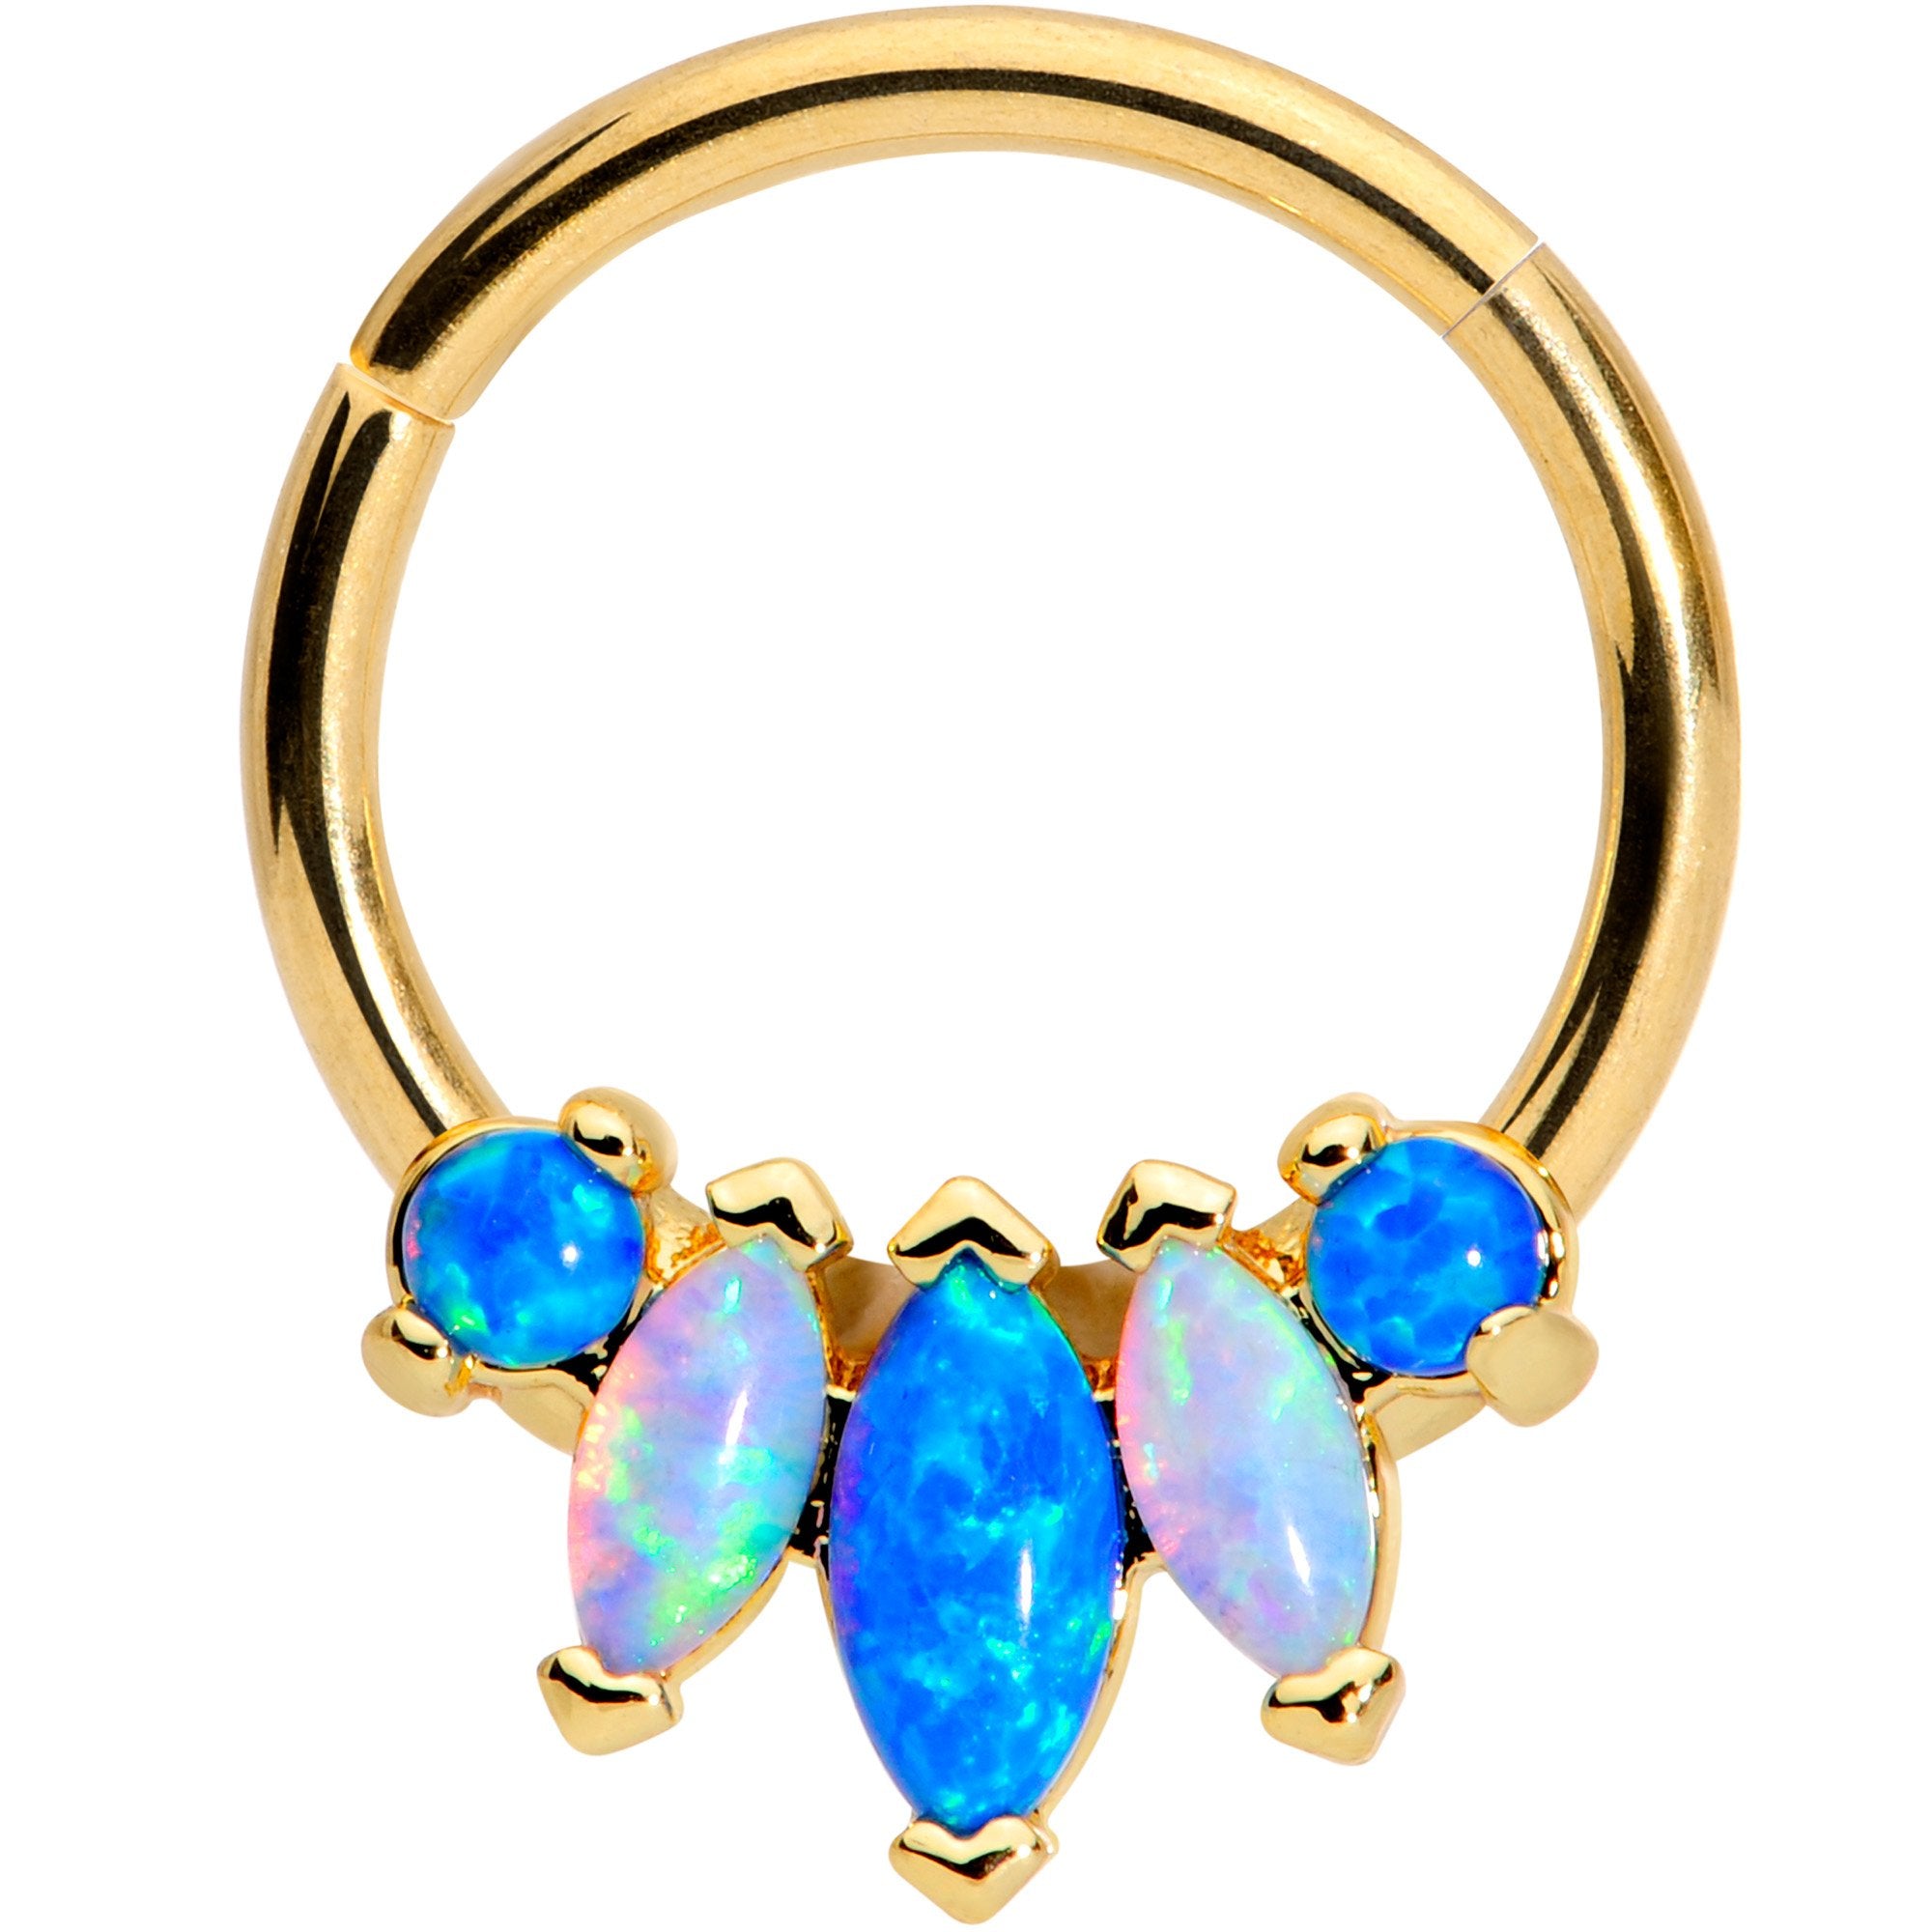 16 Gauge 3/8 Blue White Synthetic Opal Gold Tone Hinged Segment Ring